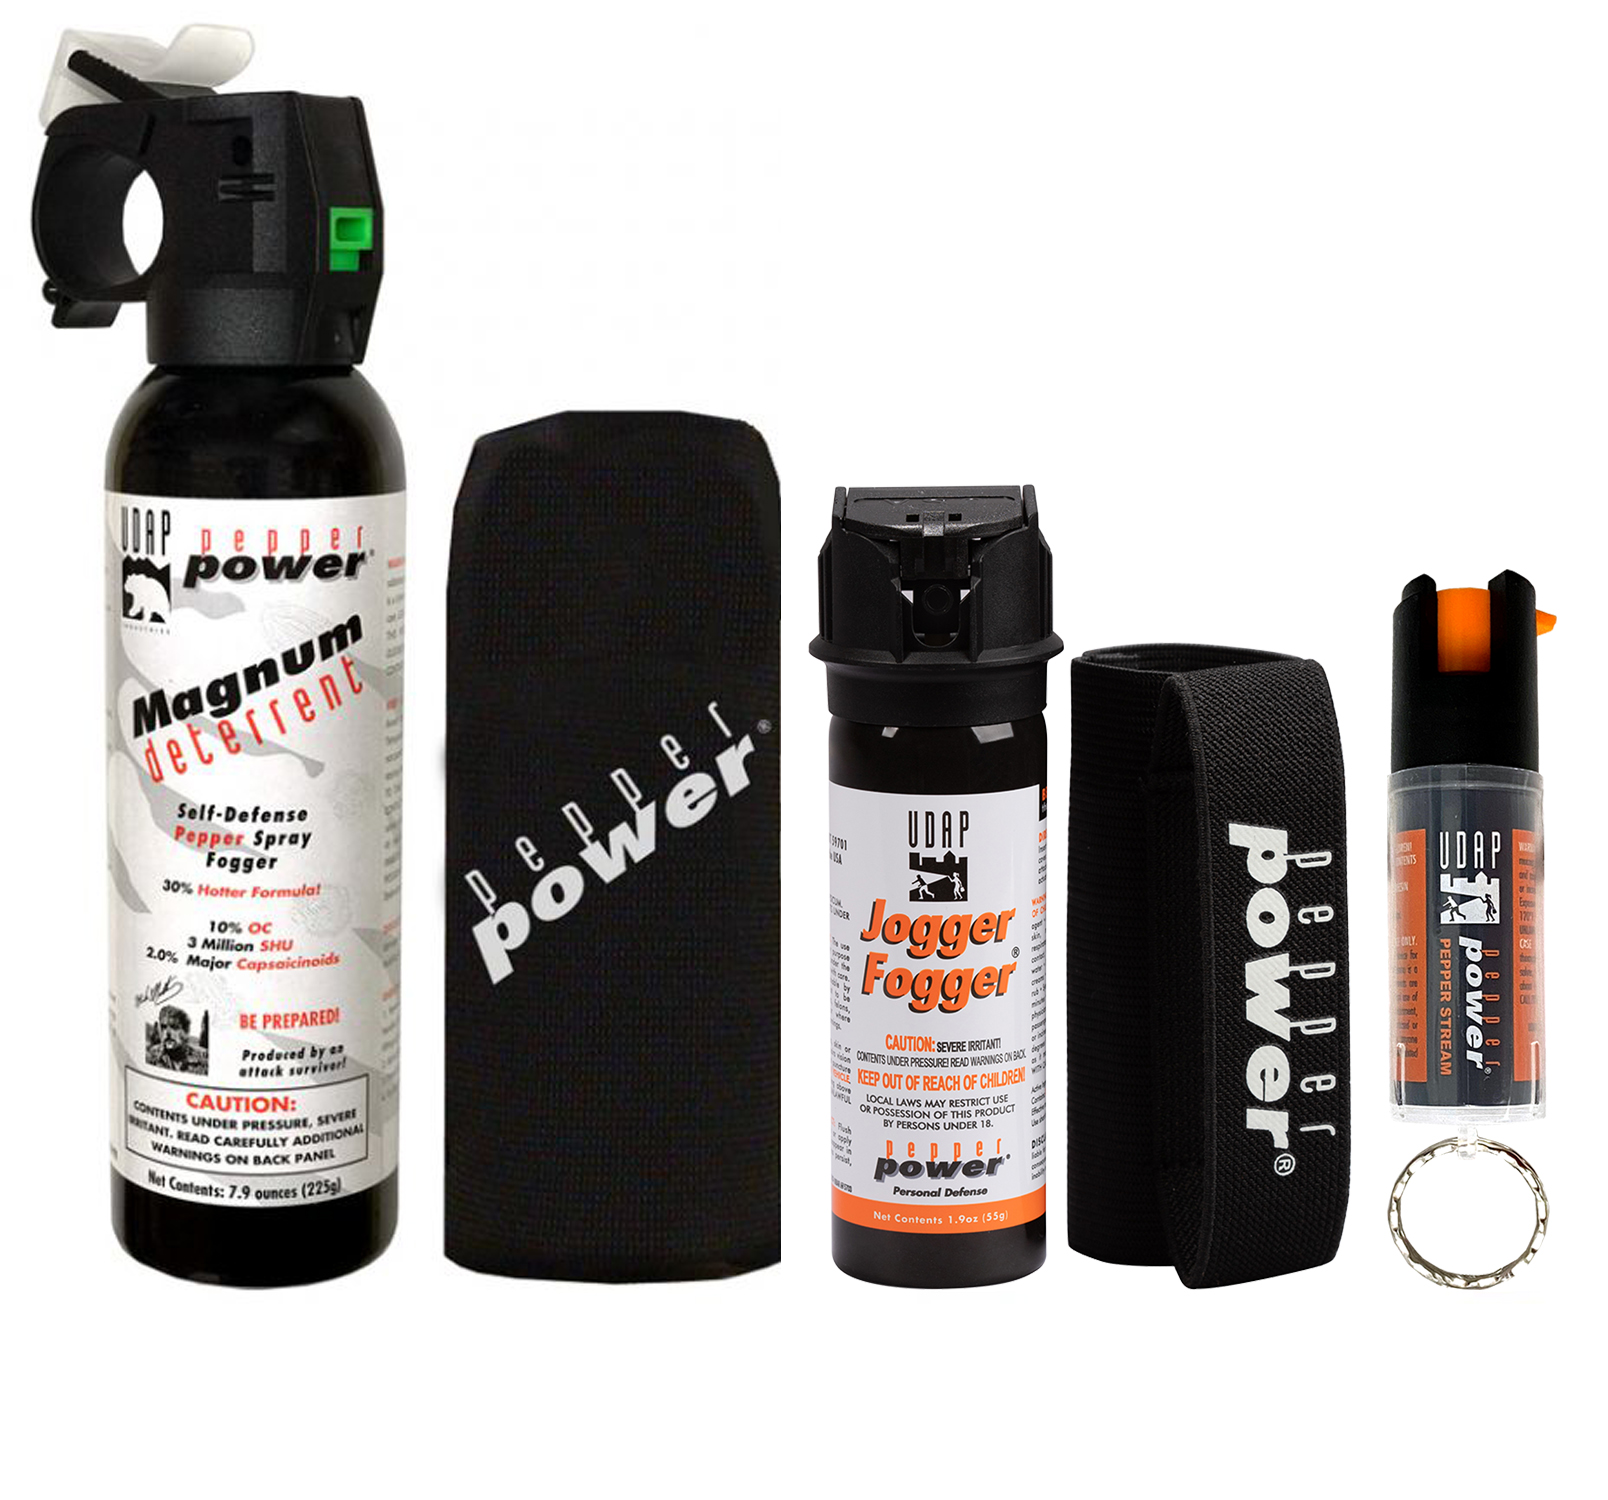 What to Use Instead of Pepper Spray